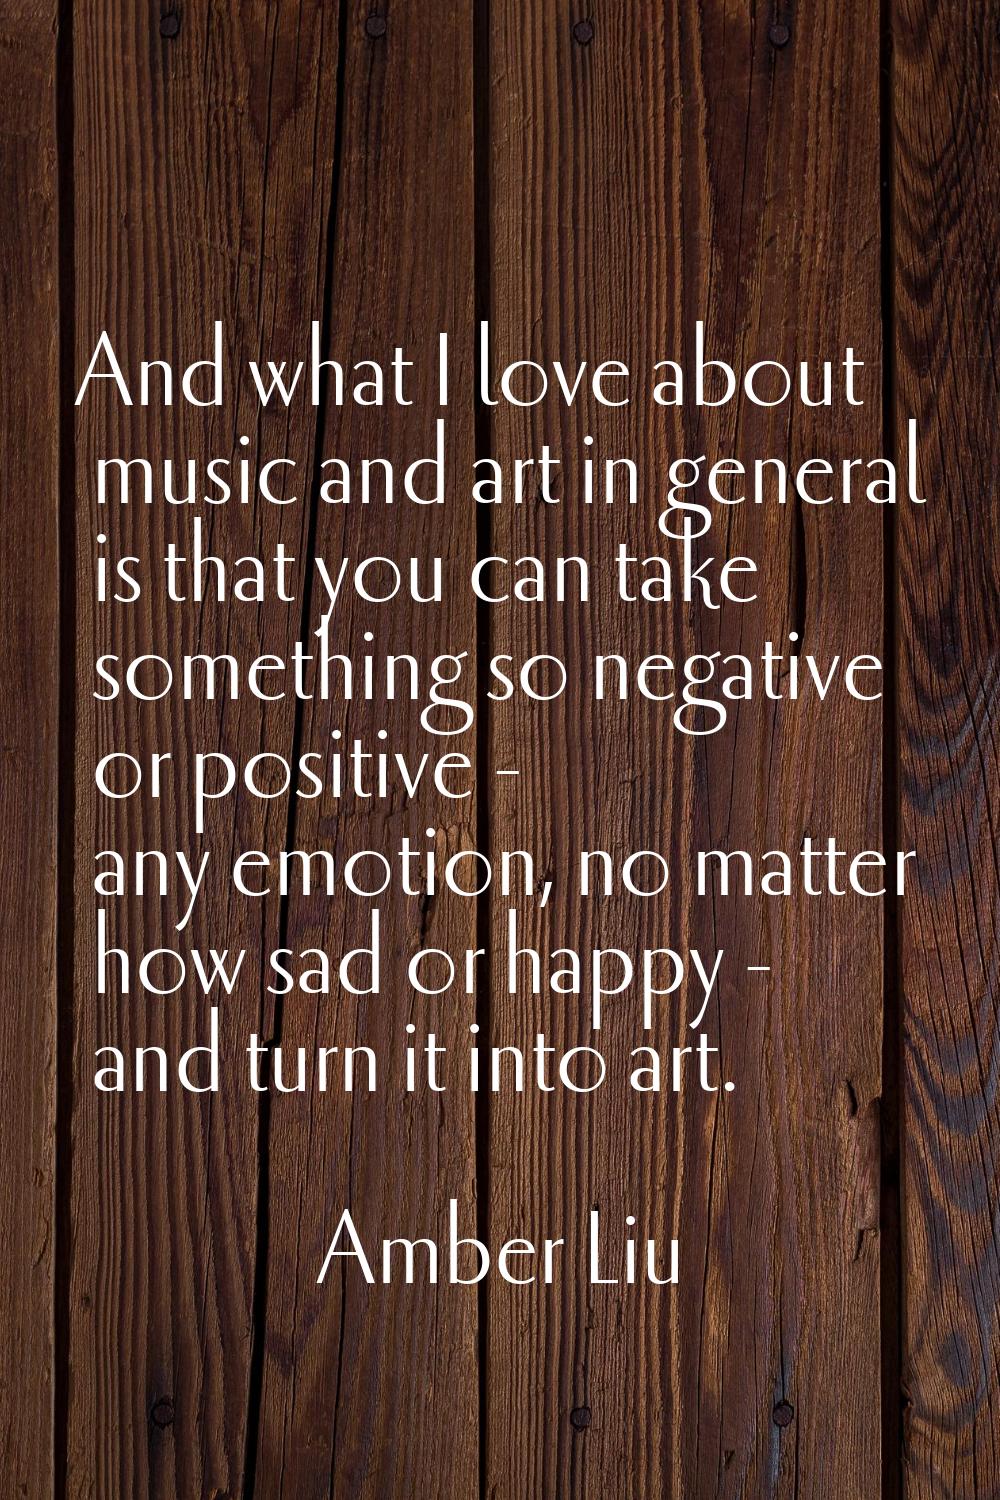 And what I love about music and art in general is that you can take something so negative or positi